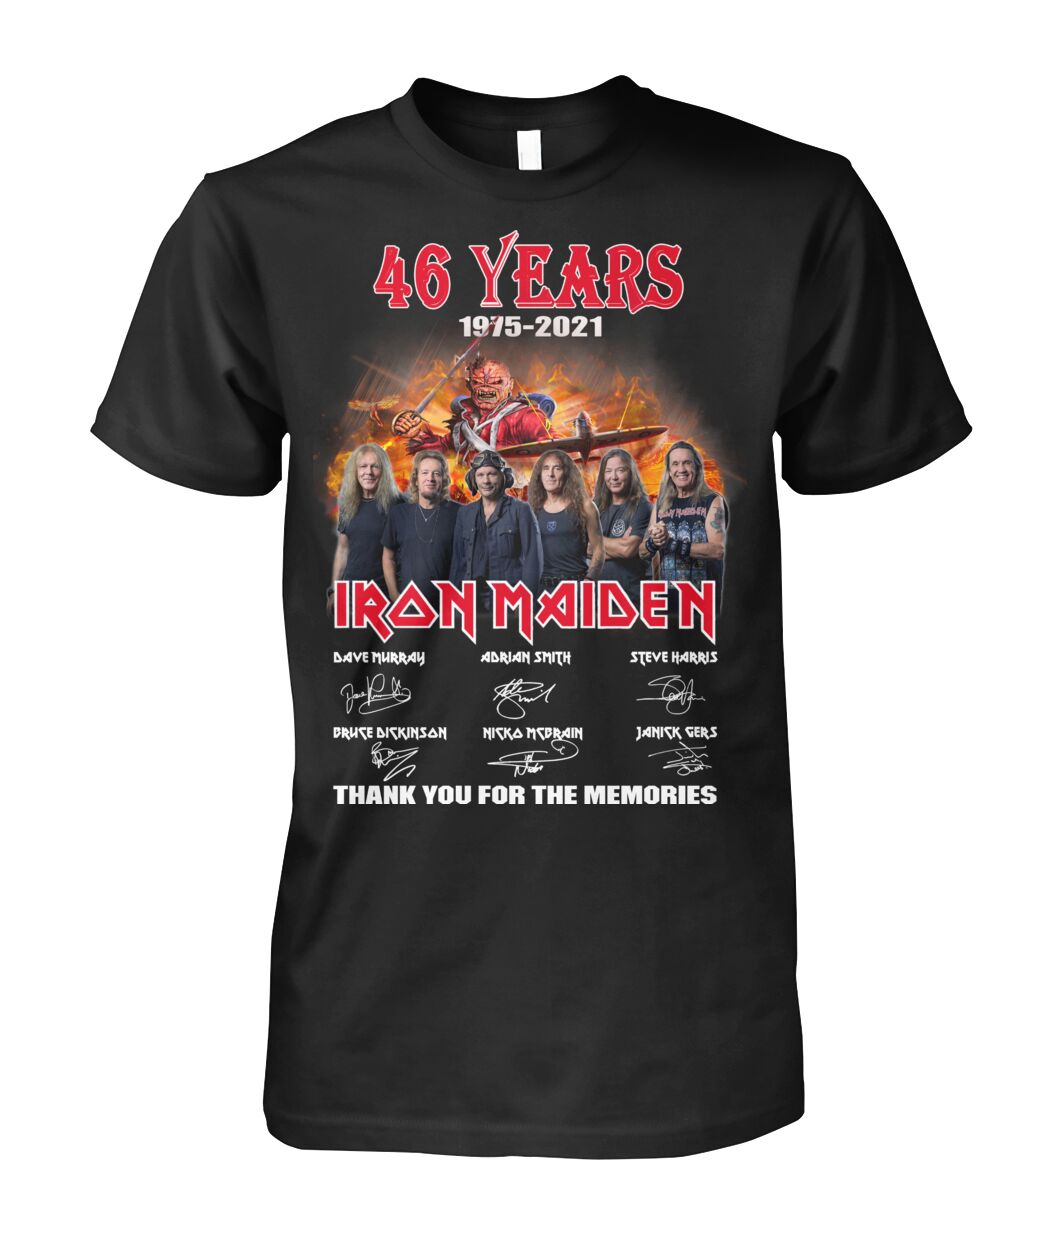 46 years Iron Maiden thank you for the memories shirt